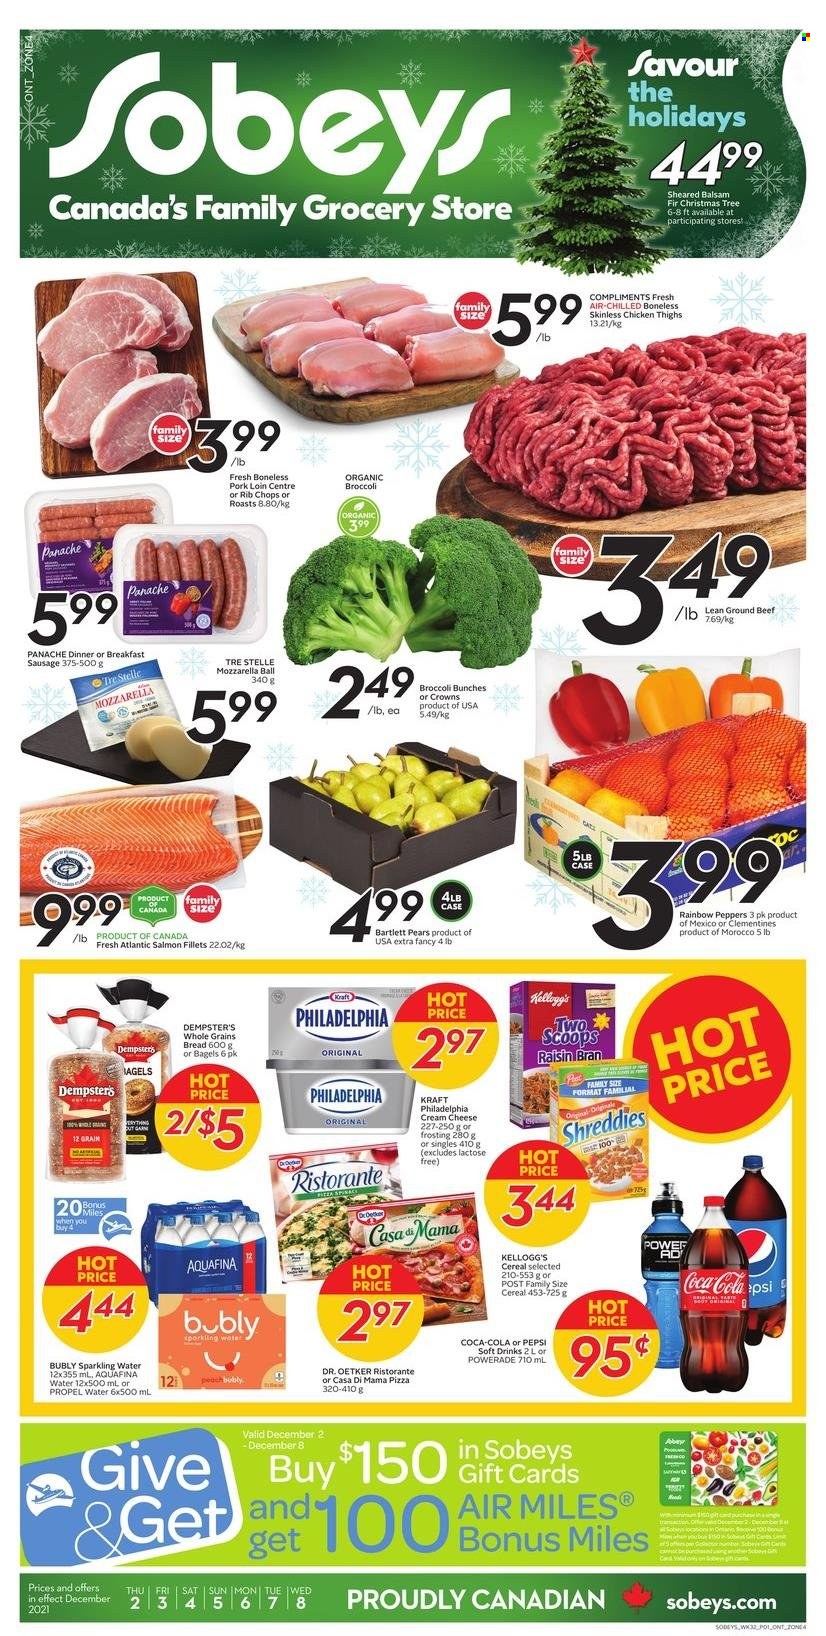 thumbnail - Sobeys Flyer - December 02, 2021 - December 08, 2021 - Sales products - bagels, bread, broccoli, peppers, Bartlett pears, clementines, pears, salmon, salmon fillet, pizza, Kraft®, sausage, Dr. Oetker, Kellogg's, frosting, cereals, Raisin Bran, Coca-Cola, Powerade, Pepsi, soft drink, Aquafina, sparkling water, chicken thighs, chicken, beef meat, ground beef, pork loin, pork meat, rib chops, Philadelphia. Page 1.